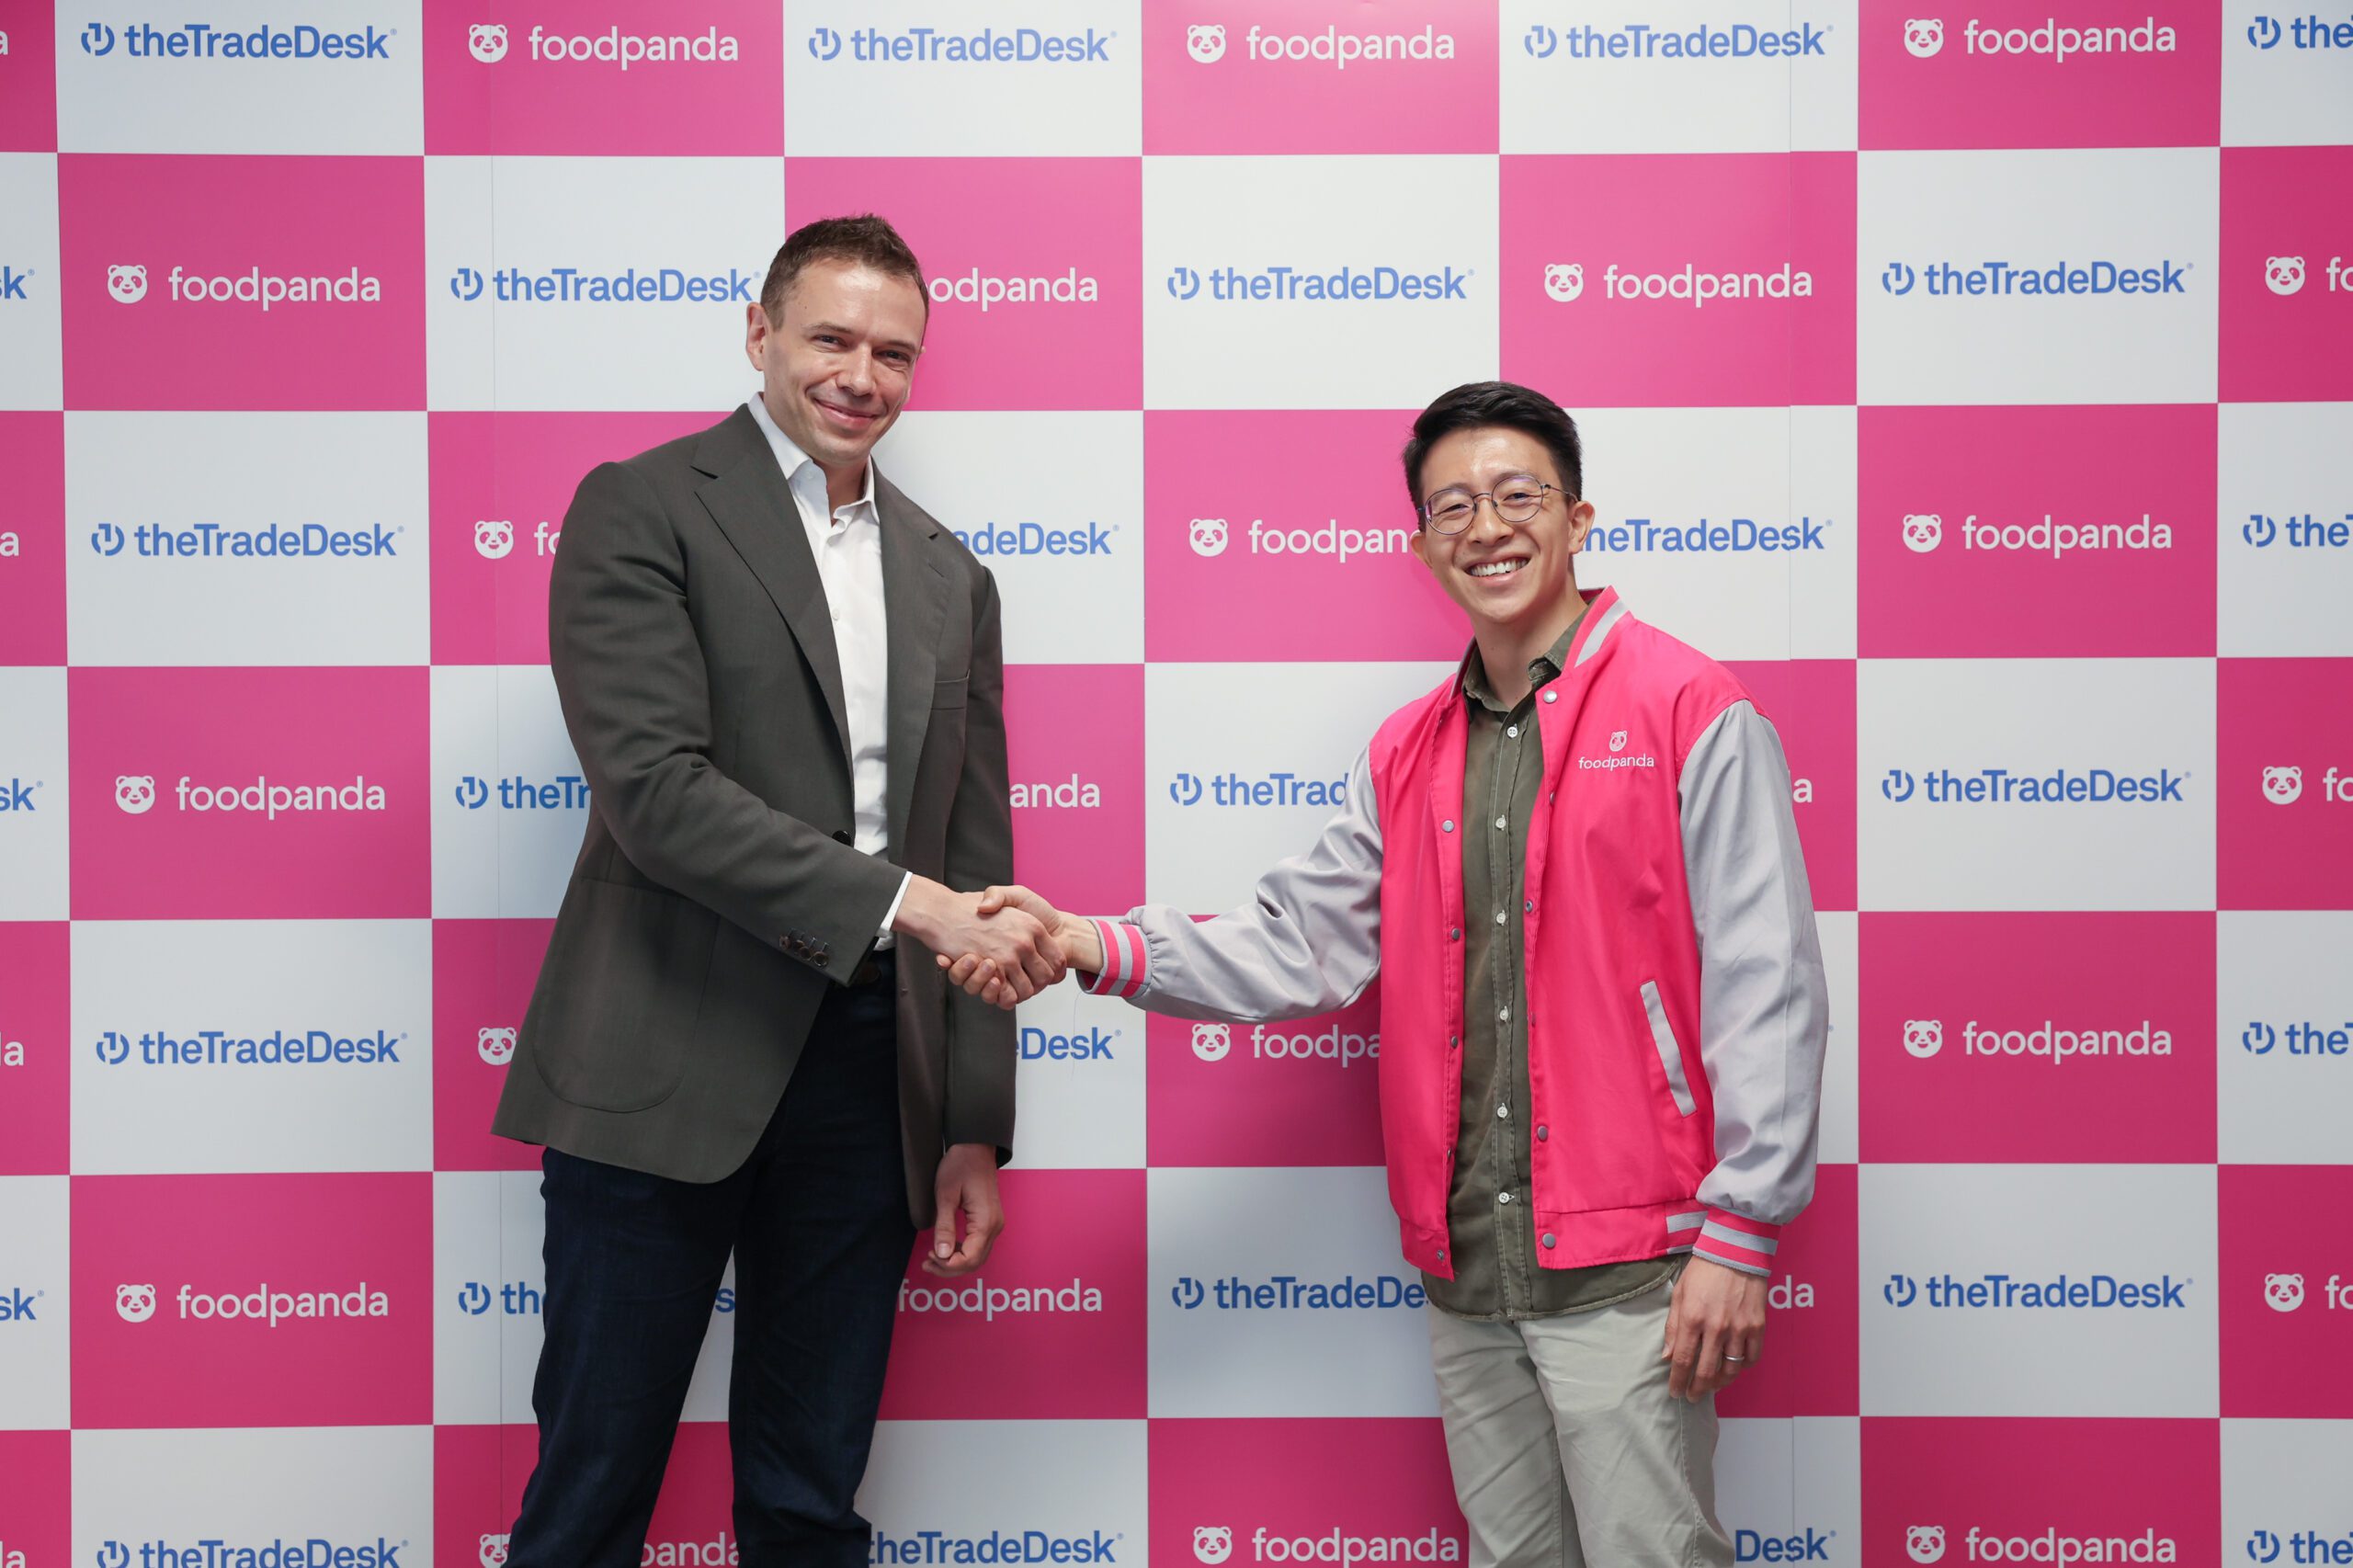 foodpanda and The Trade Desk partner up to provide brands with data-driven retail media solutions